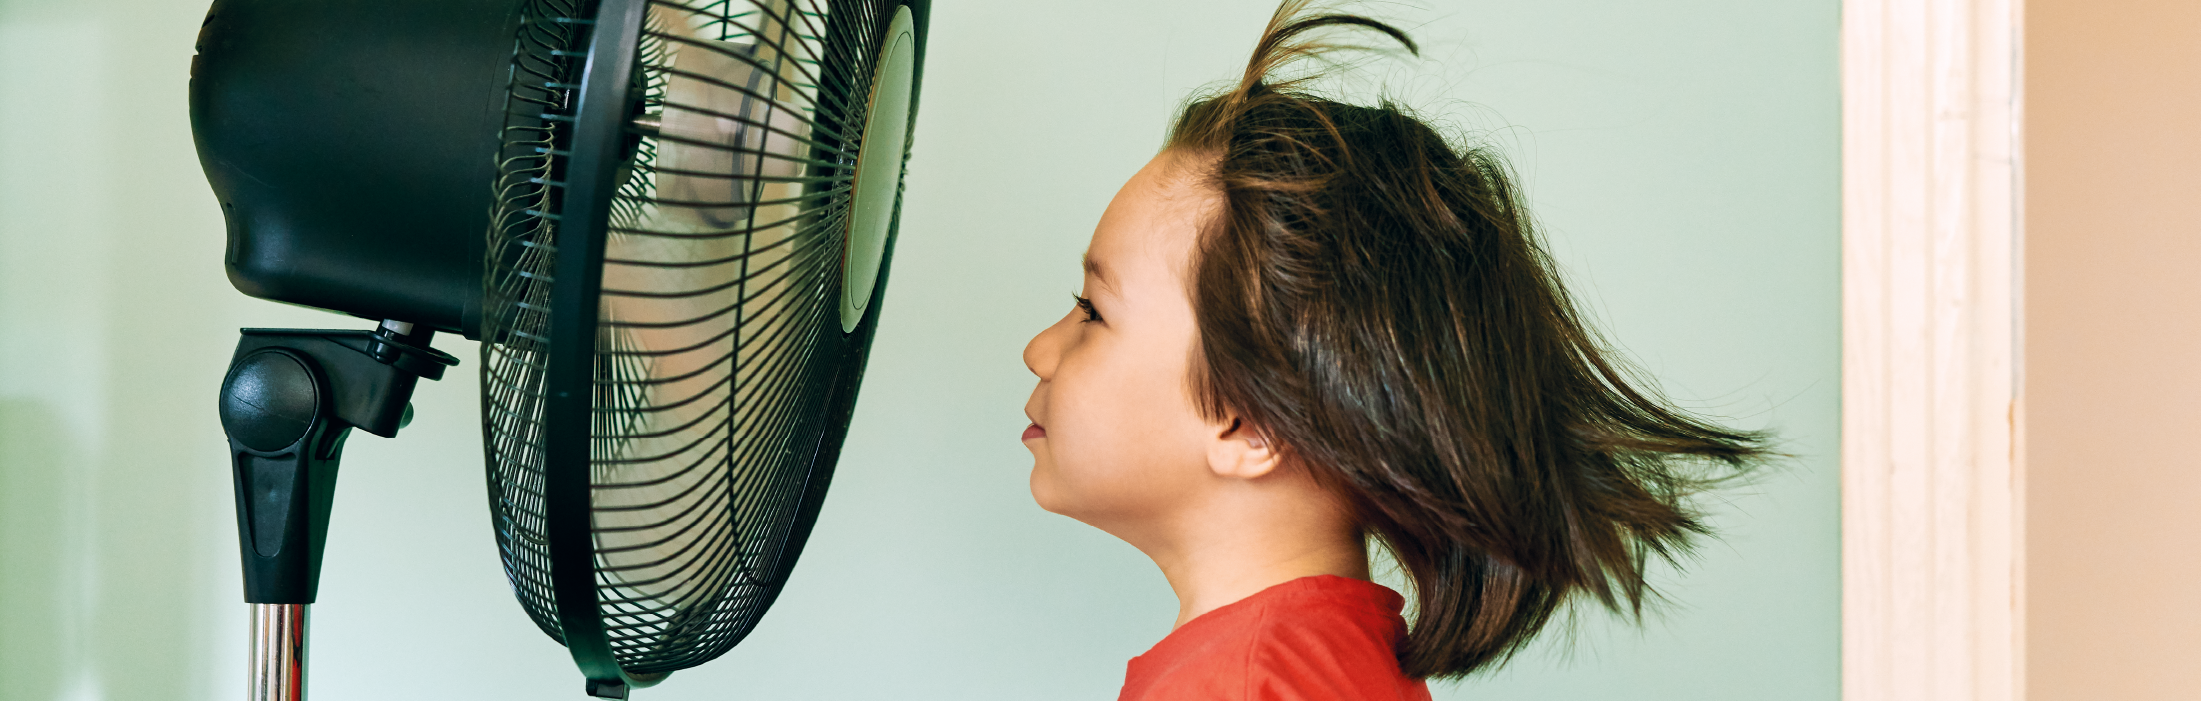 Cute child is front of electric fan on hot summer day stock photo